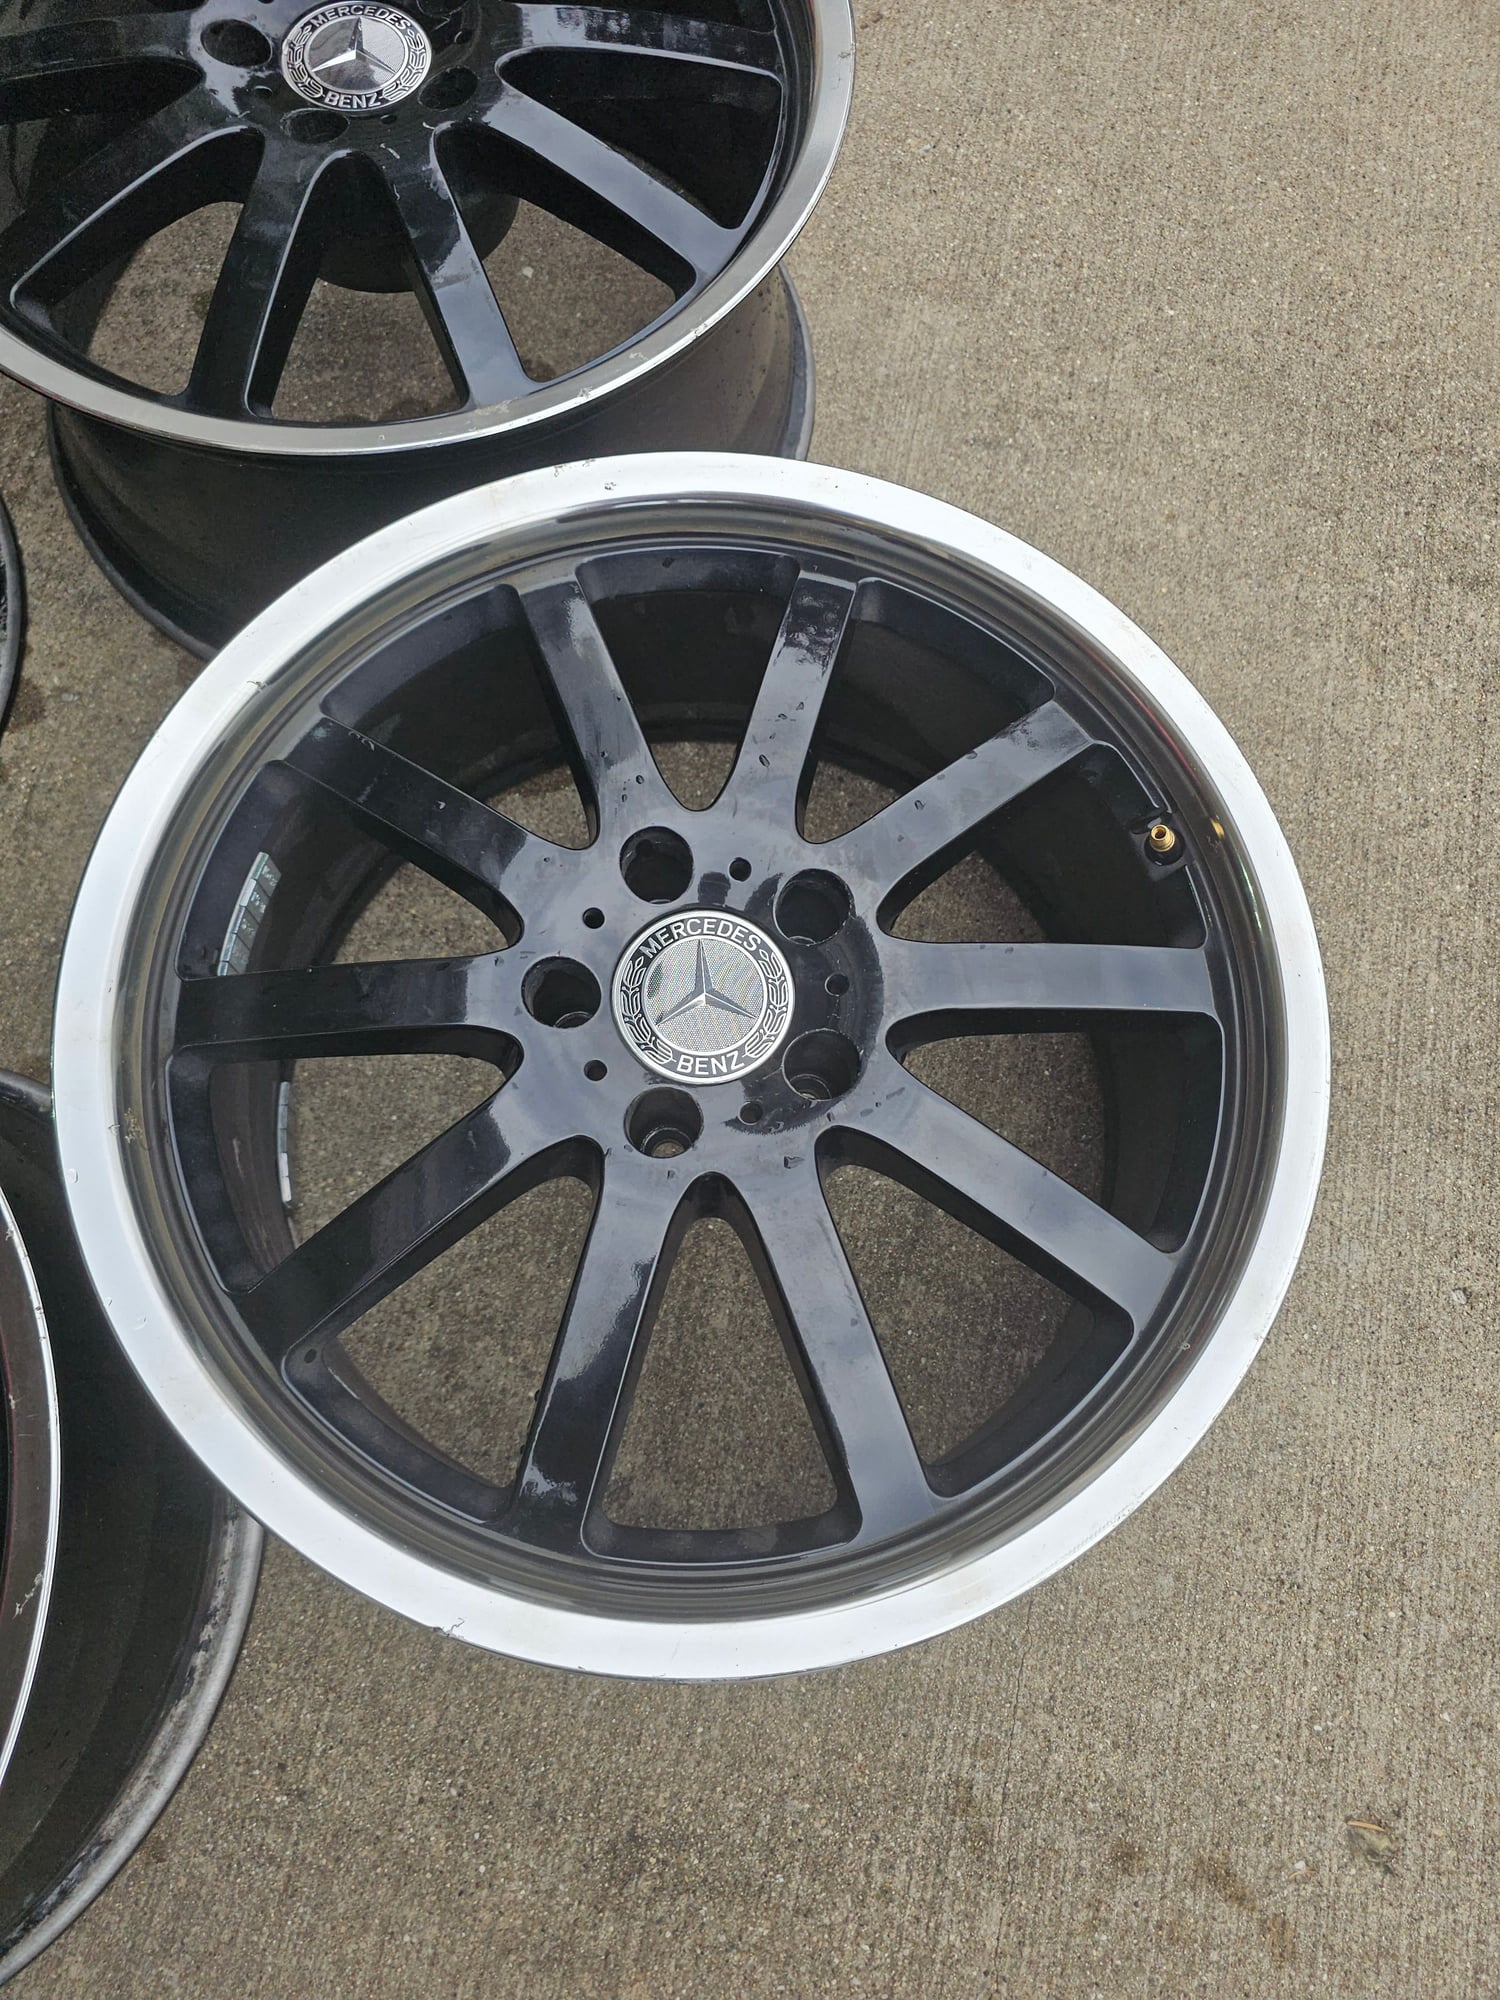 Wheels and Tires/Axles - Winter wheels for CLS or E class - Used - 2012 to 2020 Mercedes-Benz CLS550 - 2012 to 2020 Mercedes-Benz E-Class - Downers Grove, IL 60516, United States